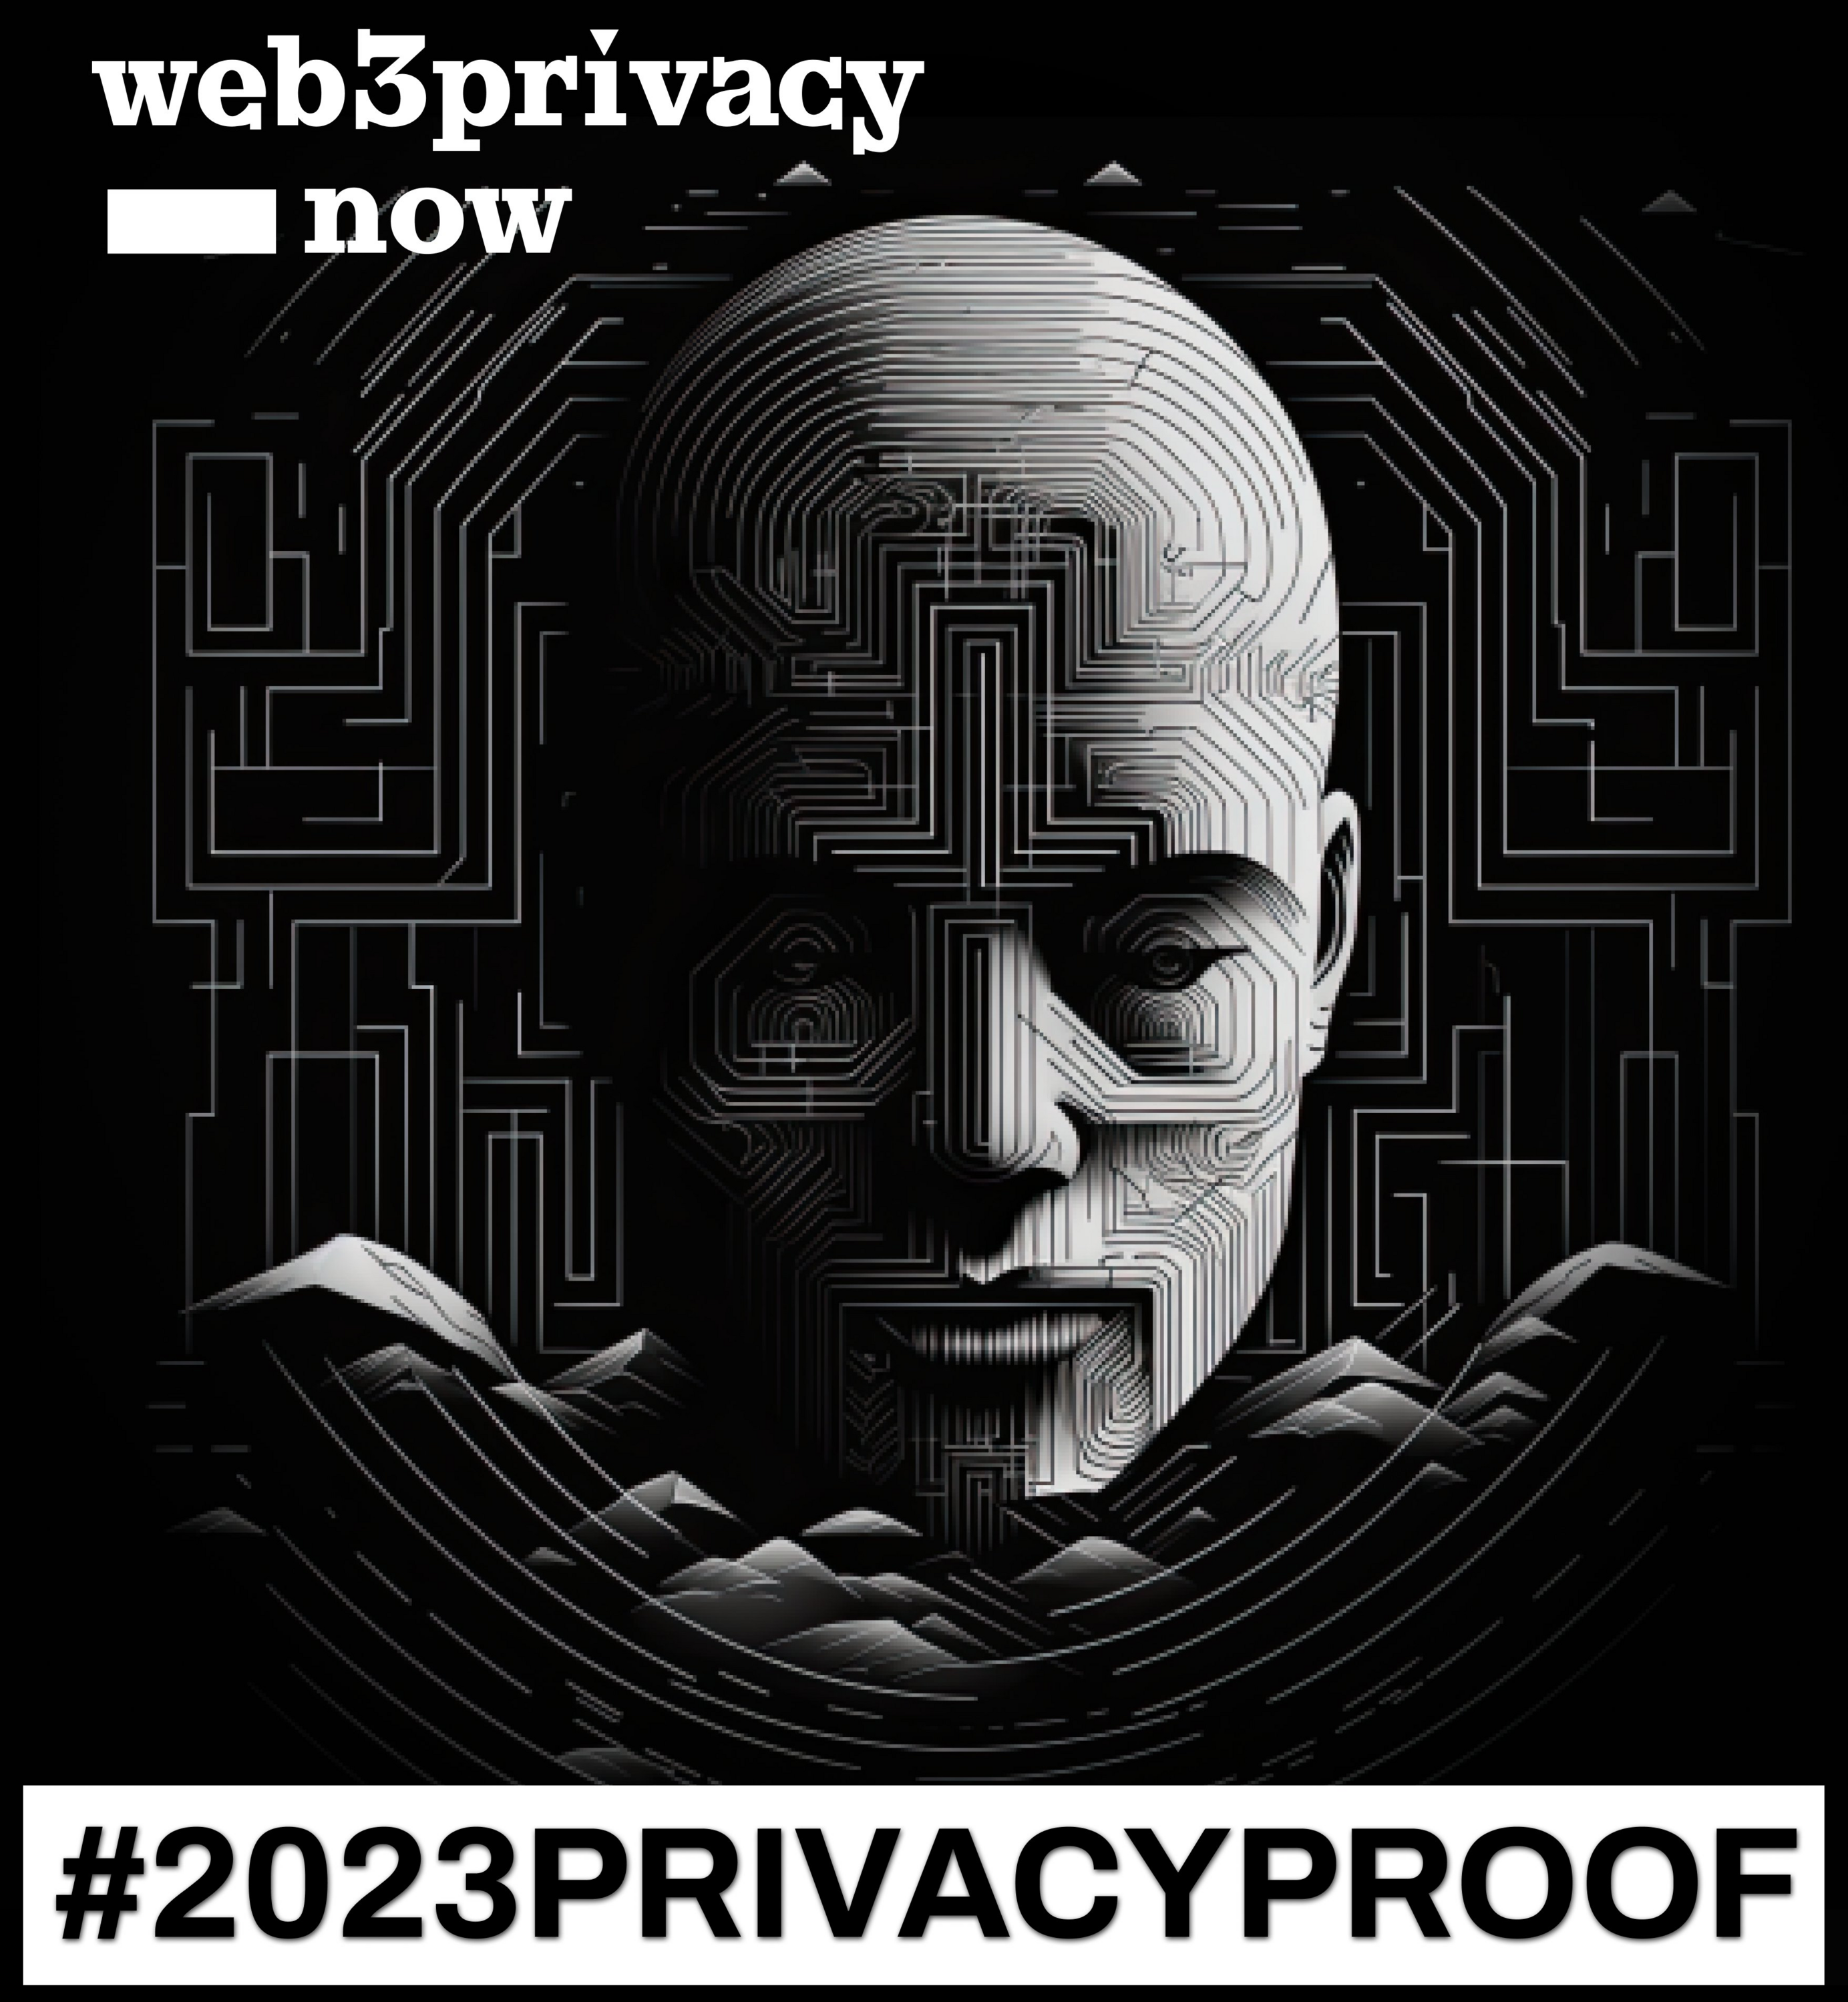 A black and white picture showing a geometric face on a overlaying a labyrinth. The text spells "web3privacy now" and "#2023PrivacyProof"